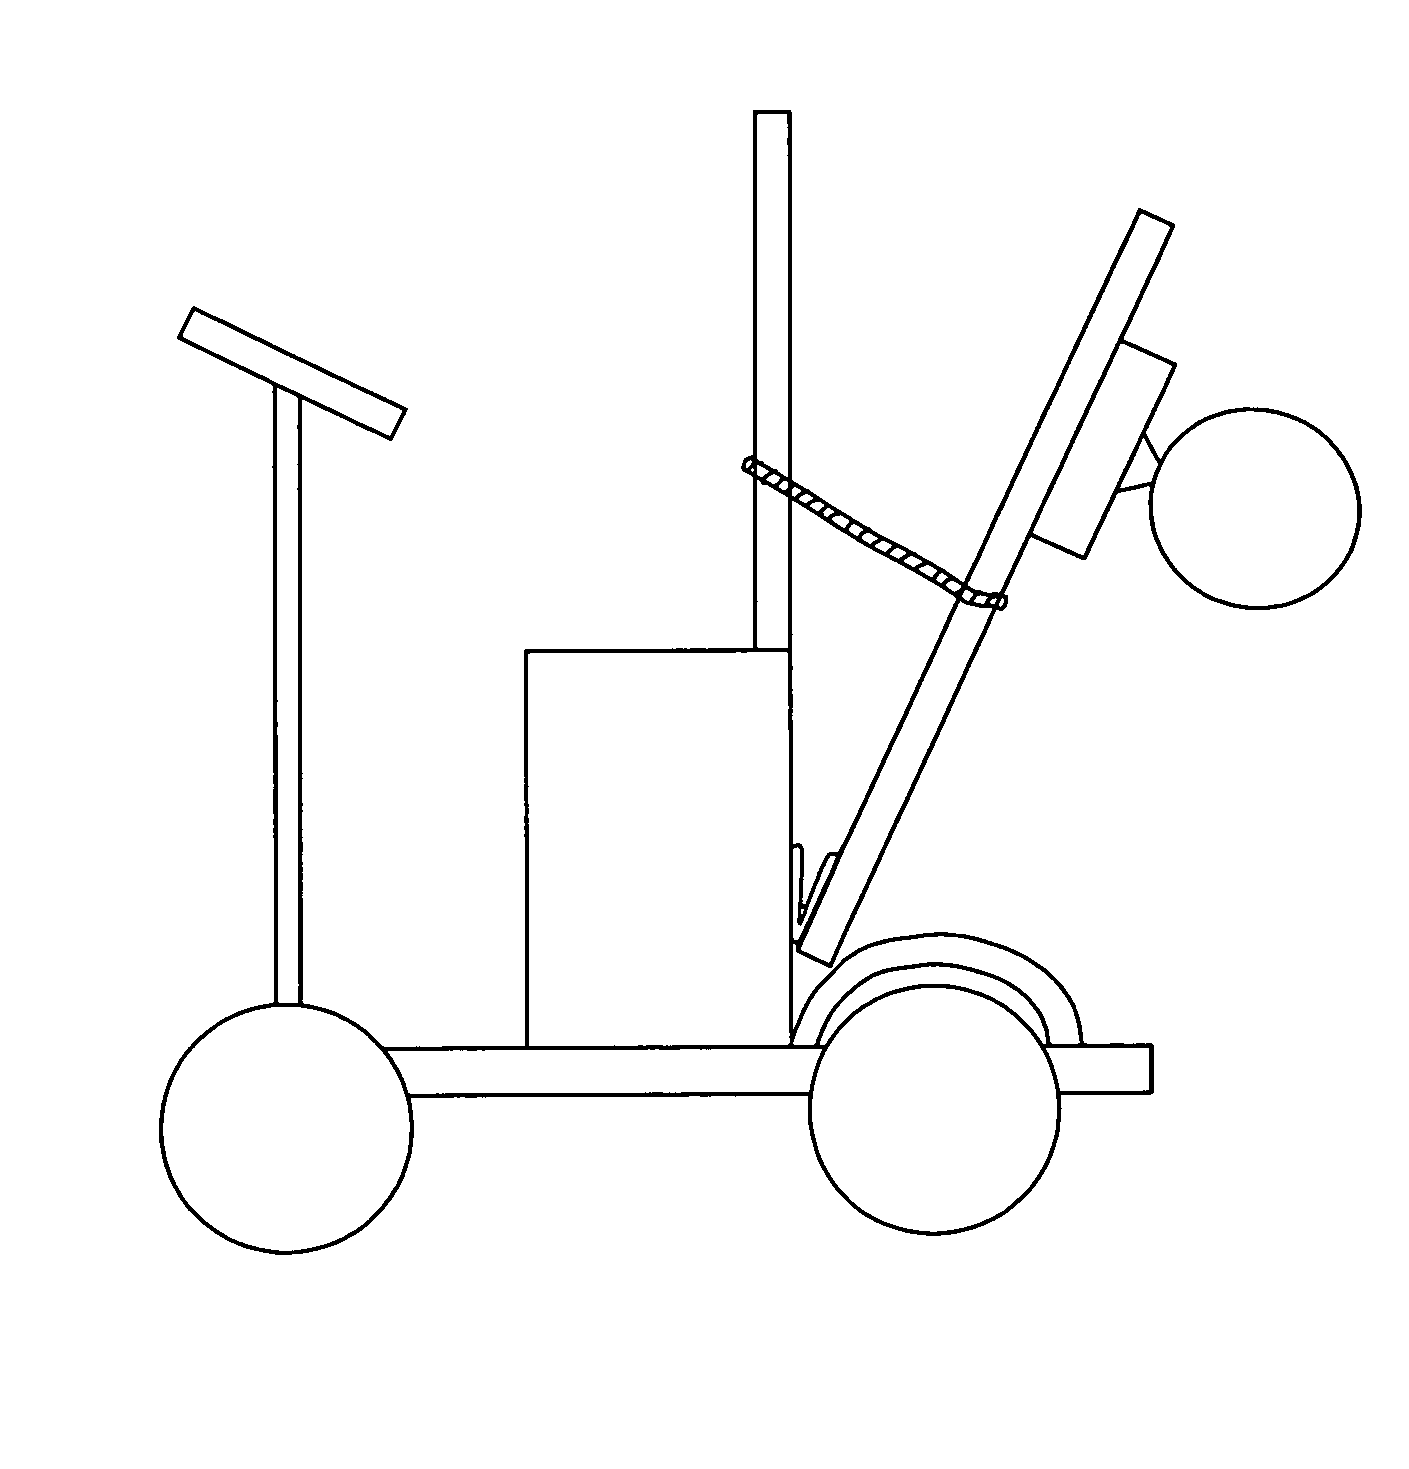 Battery-powered motorized vehicle with a carrying platform